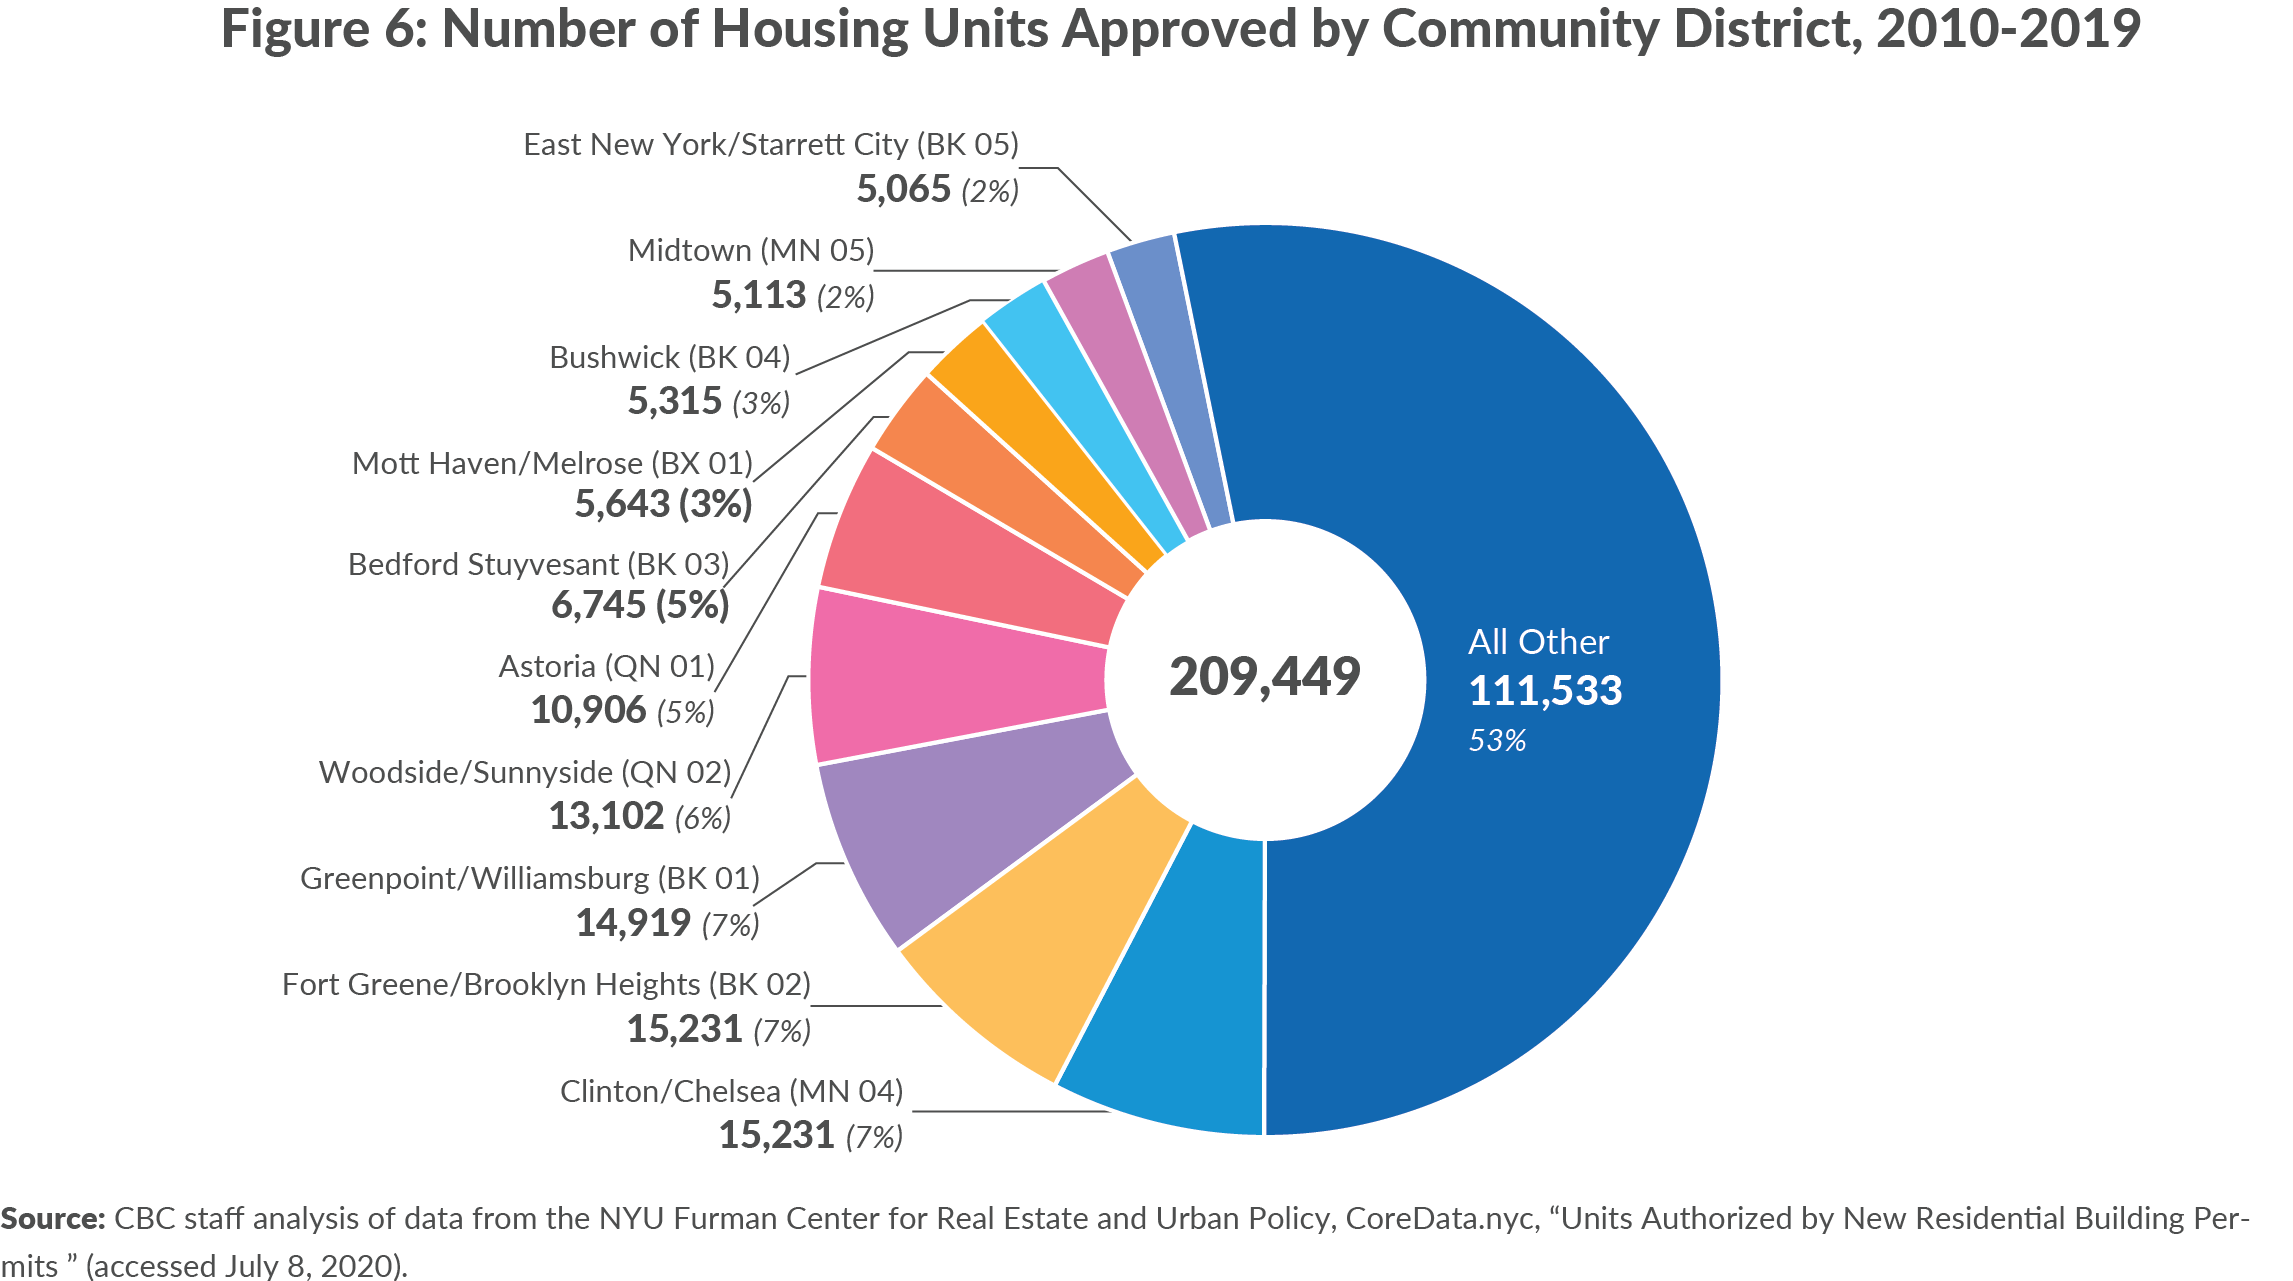 Figure 6. Building Permits Authorized by New York City Community District, 2010-2019